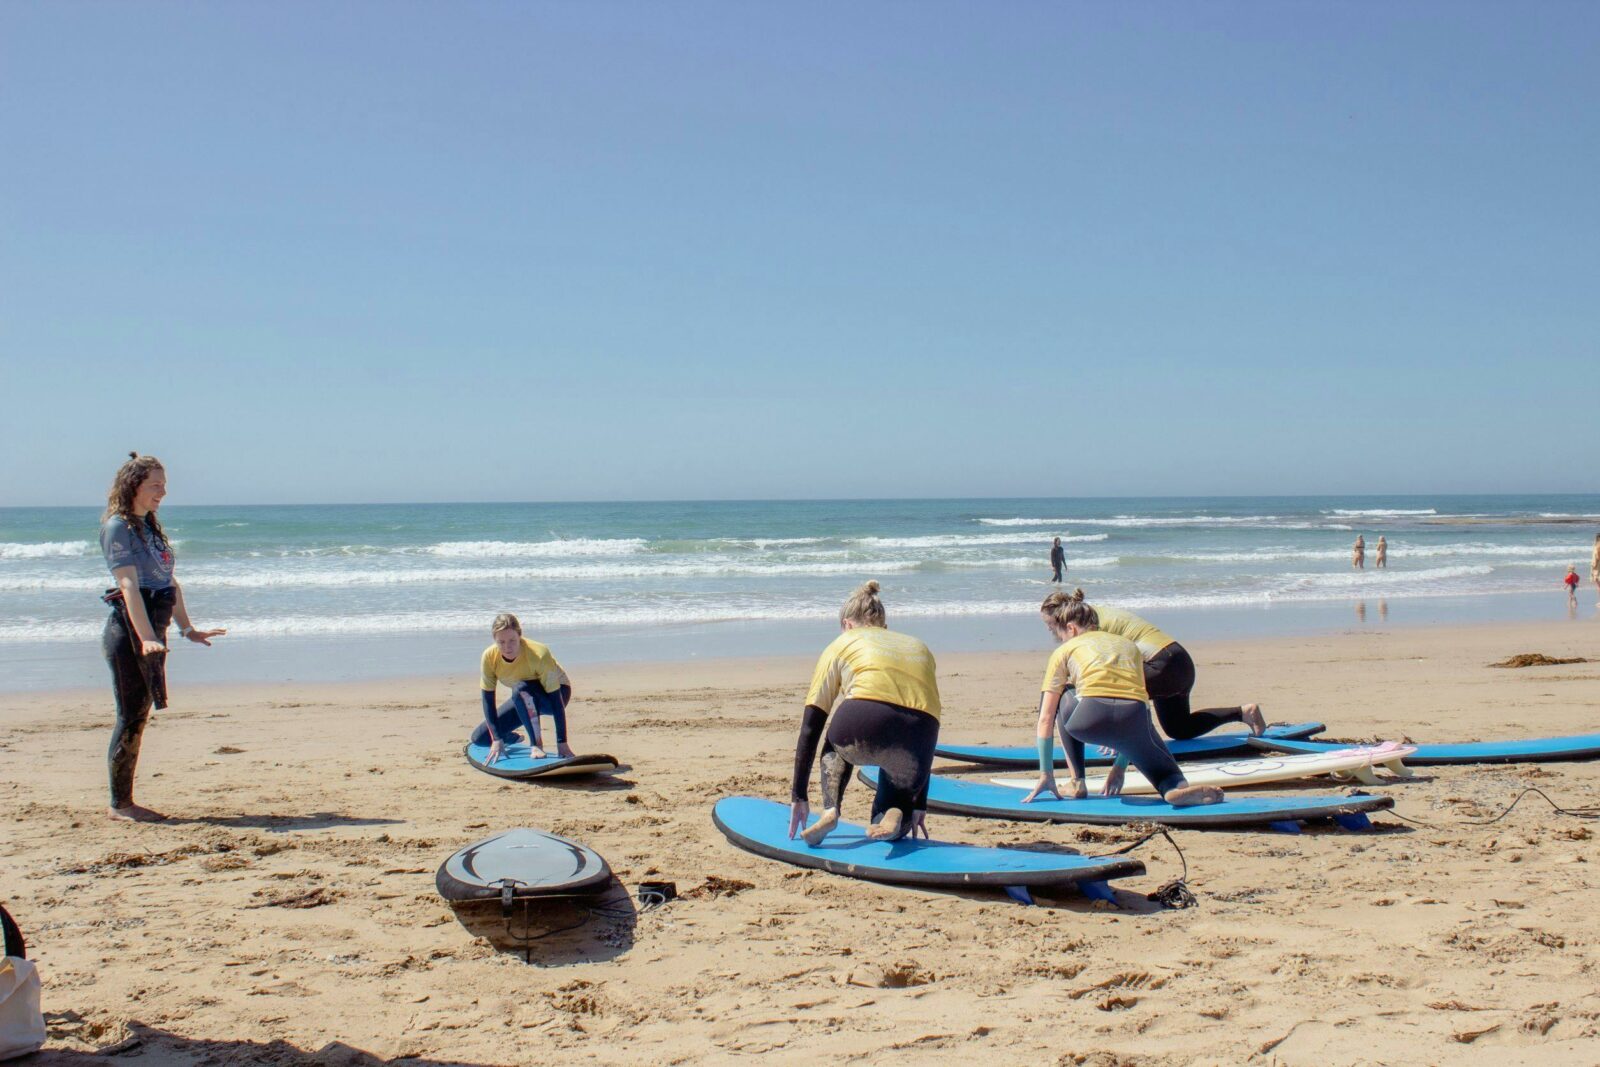 Four surfers practicing standing on boards on the sand with the surf instructor providing direction.